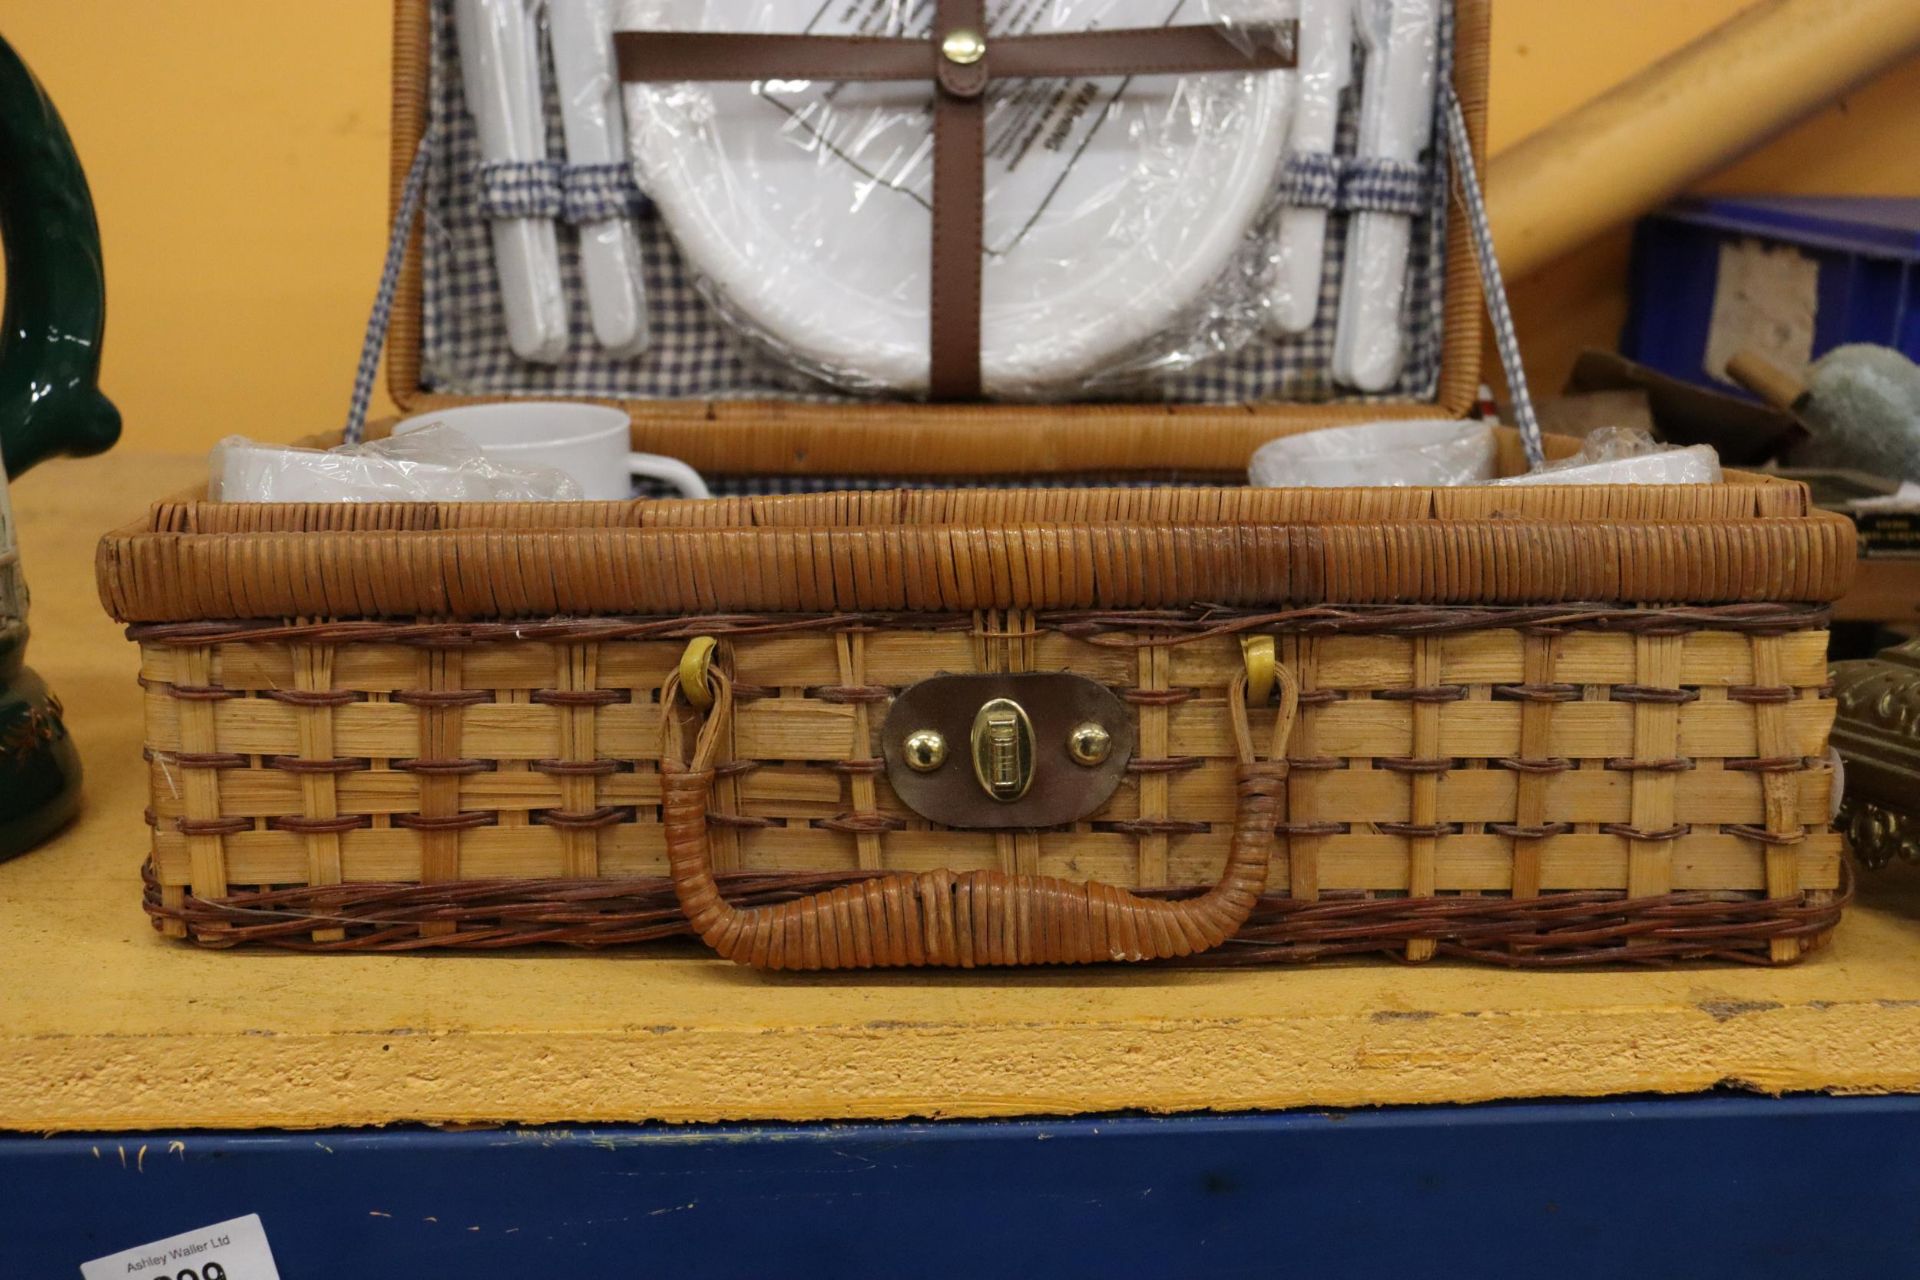 A WICKER PICNIC BASKET AND CONTENTS - Image 5 of 7